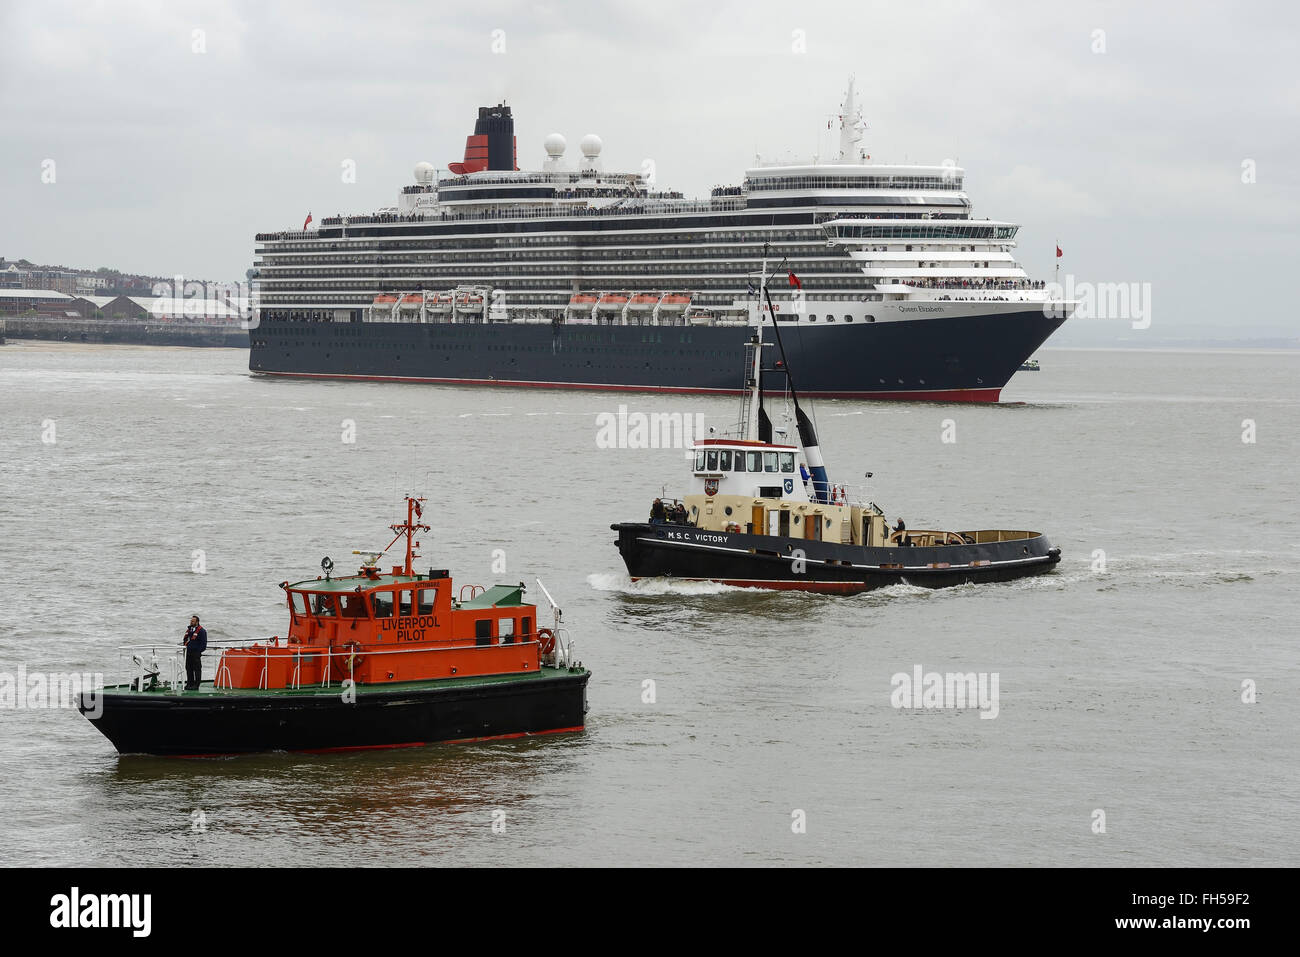 The Three Queens festival on the River Mersey. Three Cunard cruise ships visiting Liverpool UK Stock Photo